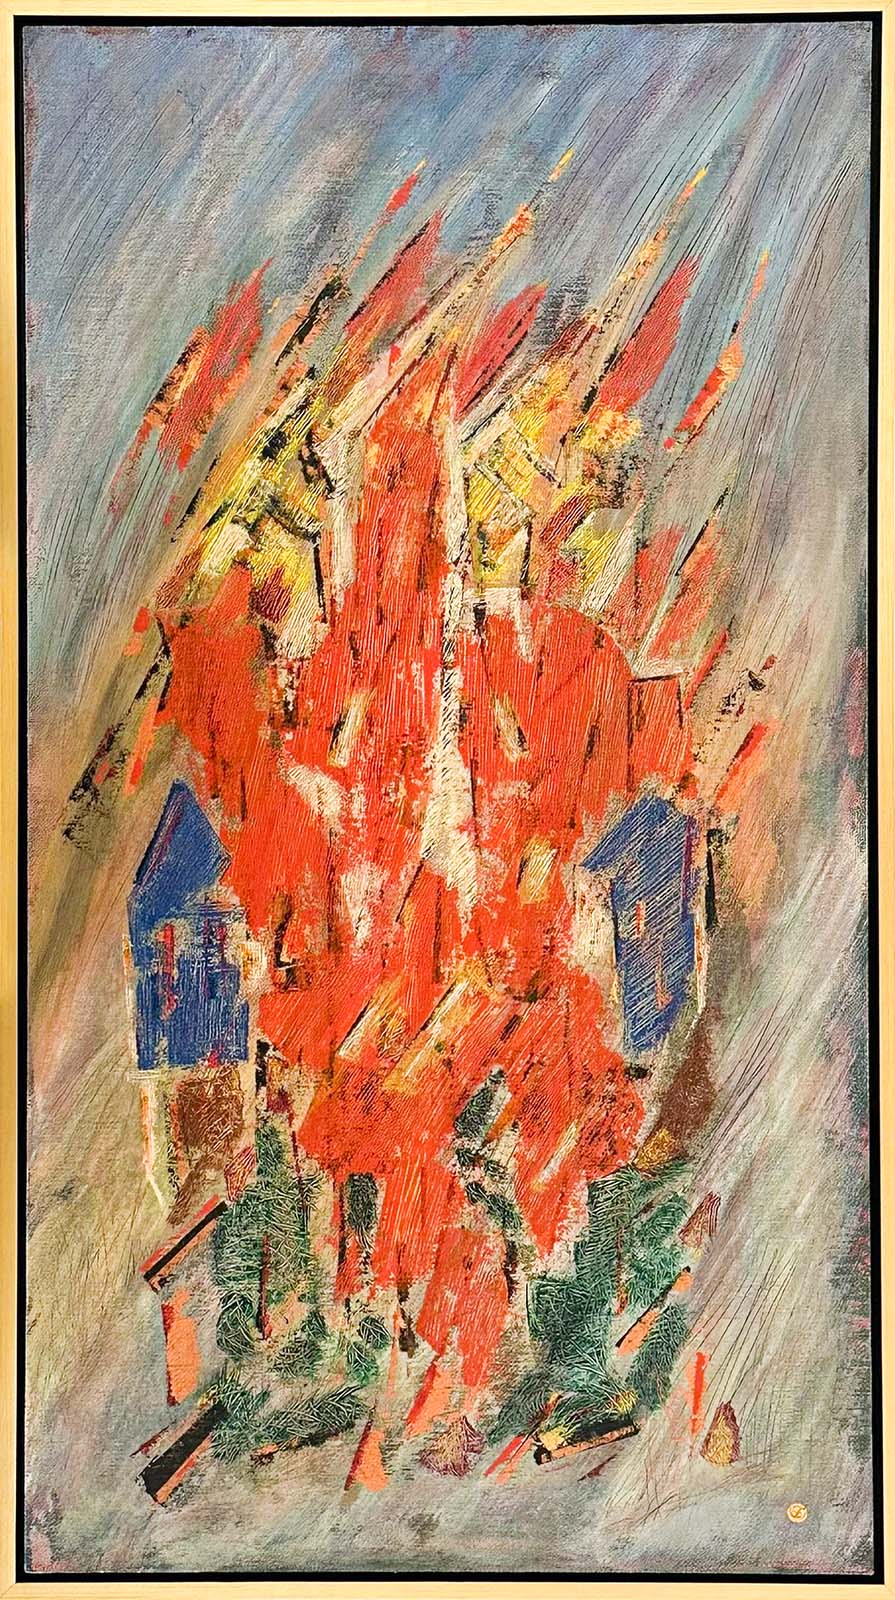 Abstract Art. Title: Hands on Fire, Oil on Board, 43x24 in, Framed by Canadian artist Franz H. Schmidt.